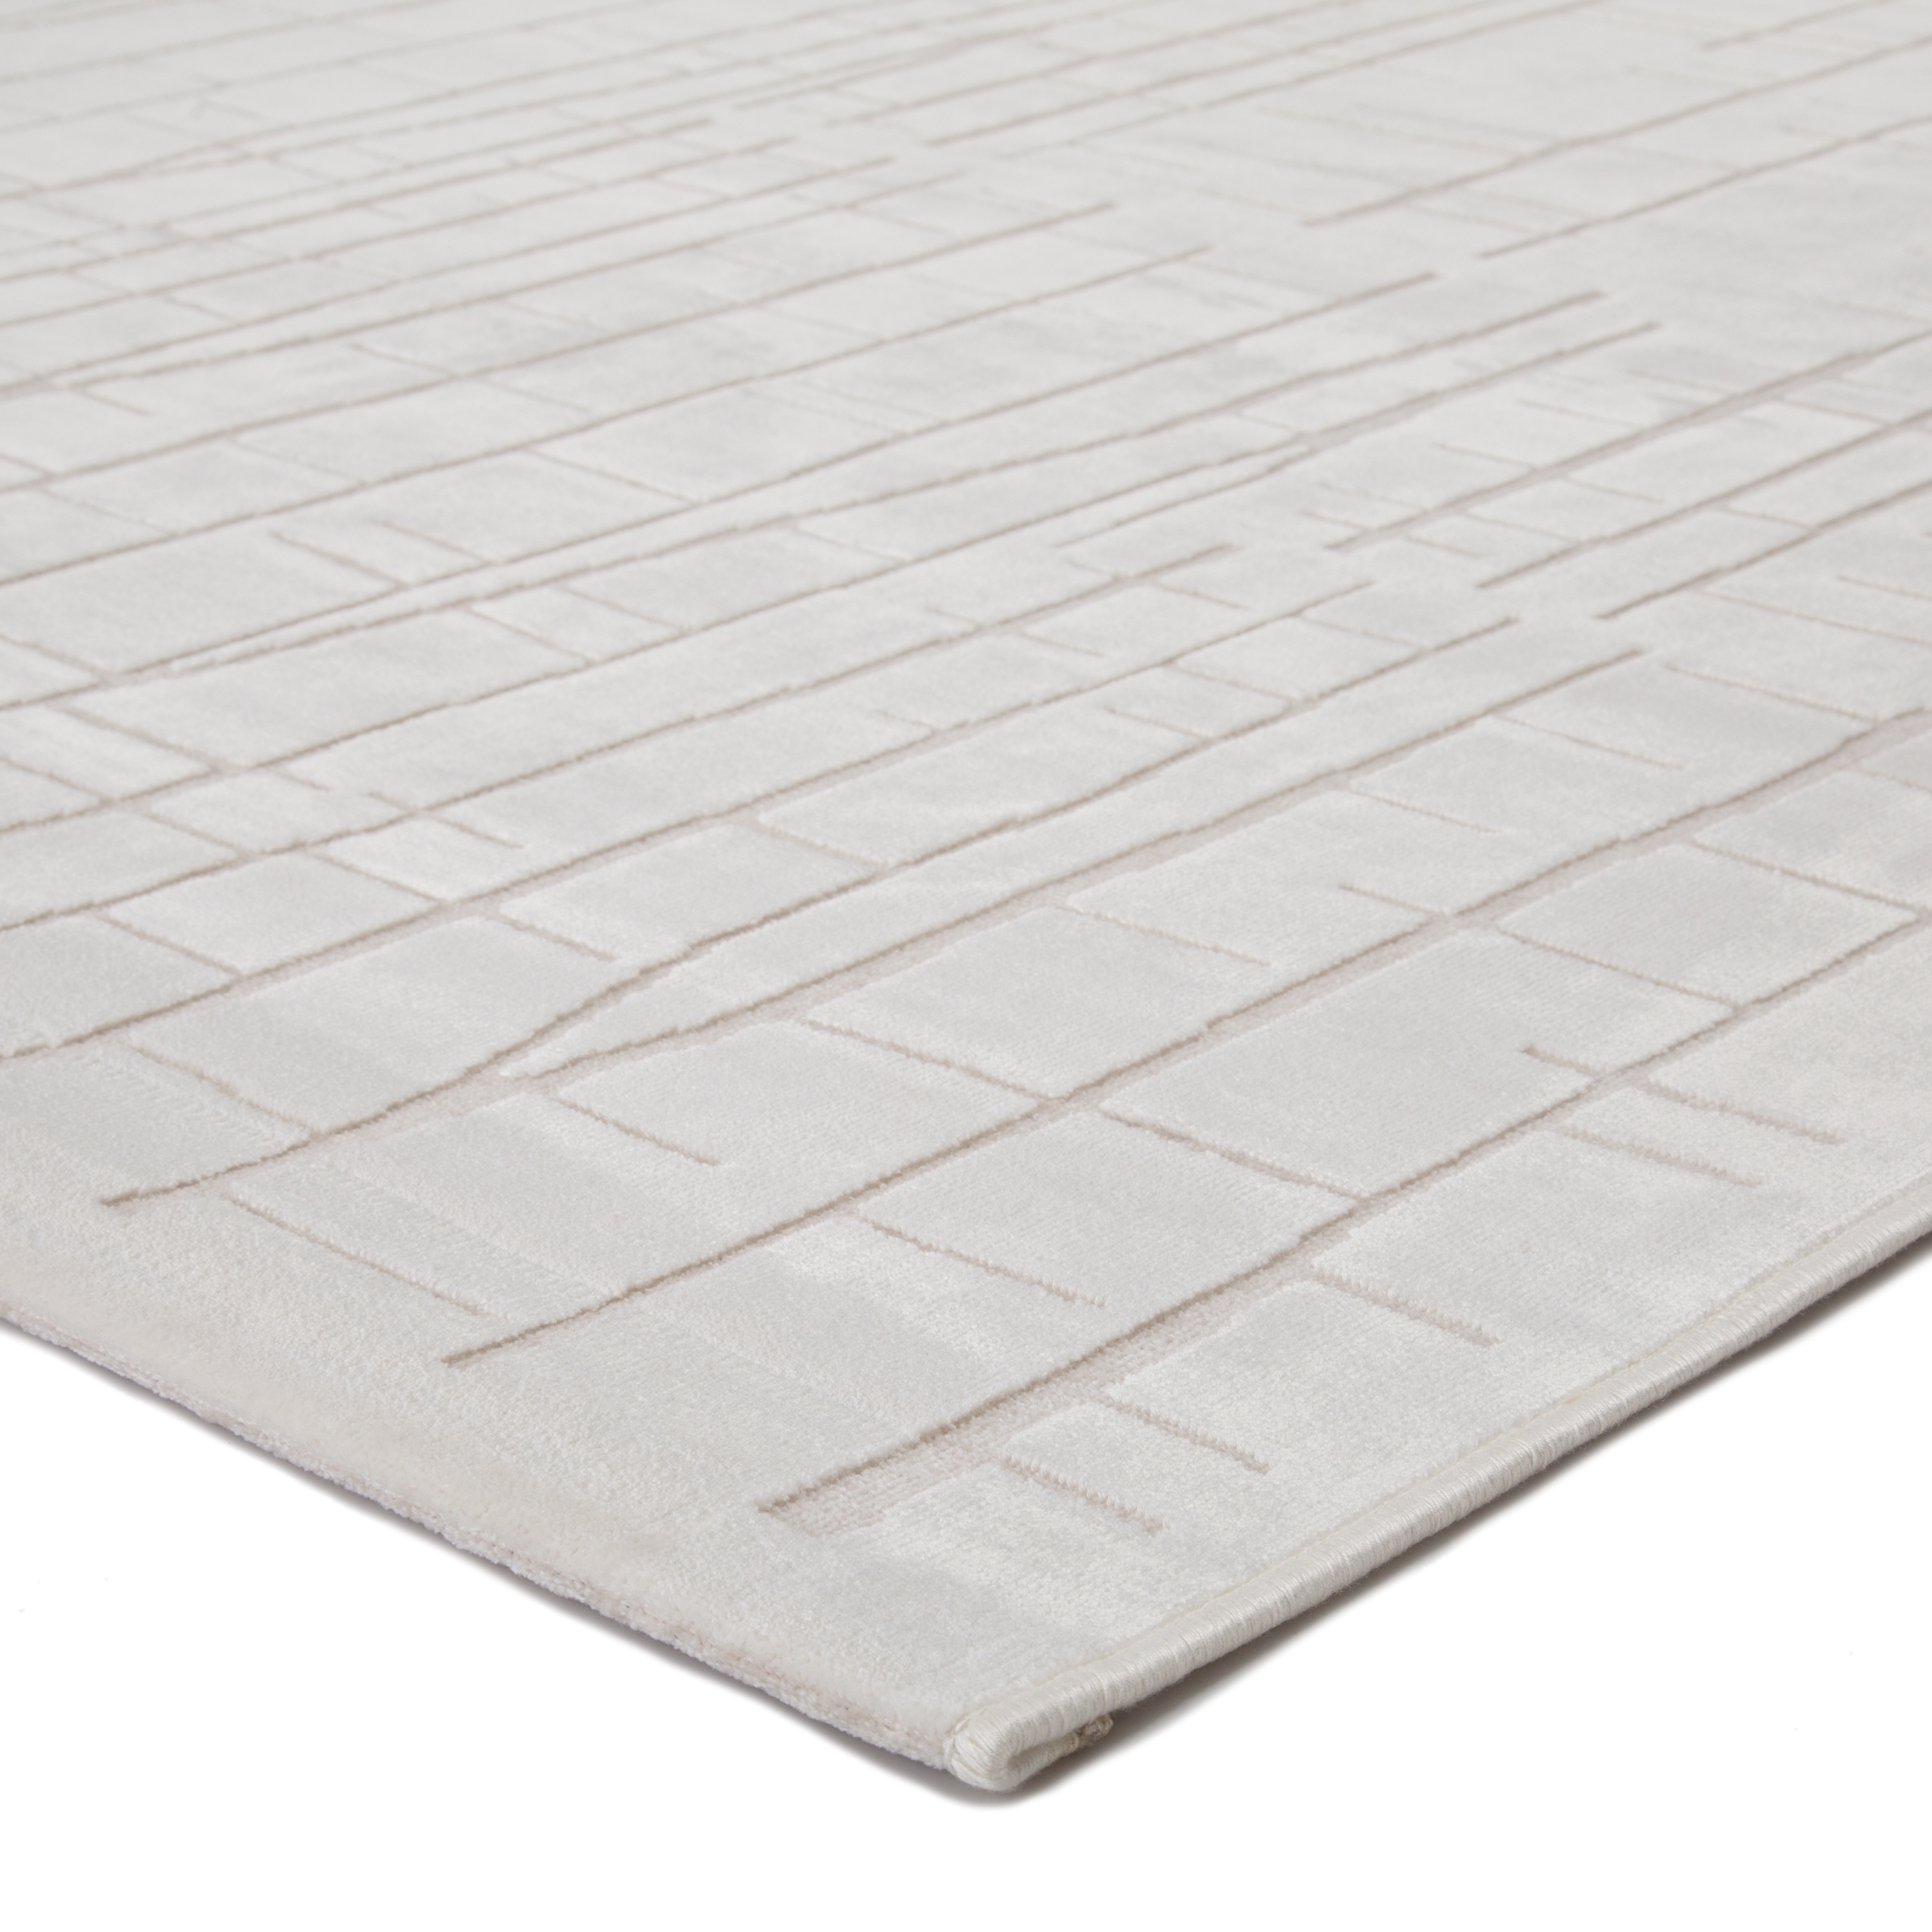 Palmer Abstract White/ Cream Area Rug (9'6"X13'6") - Image 1